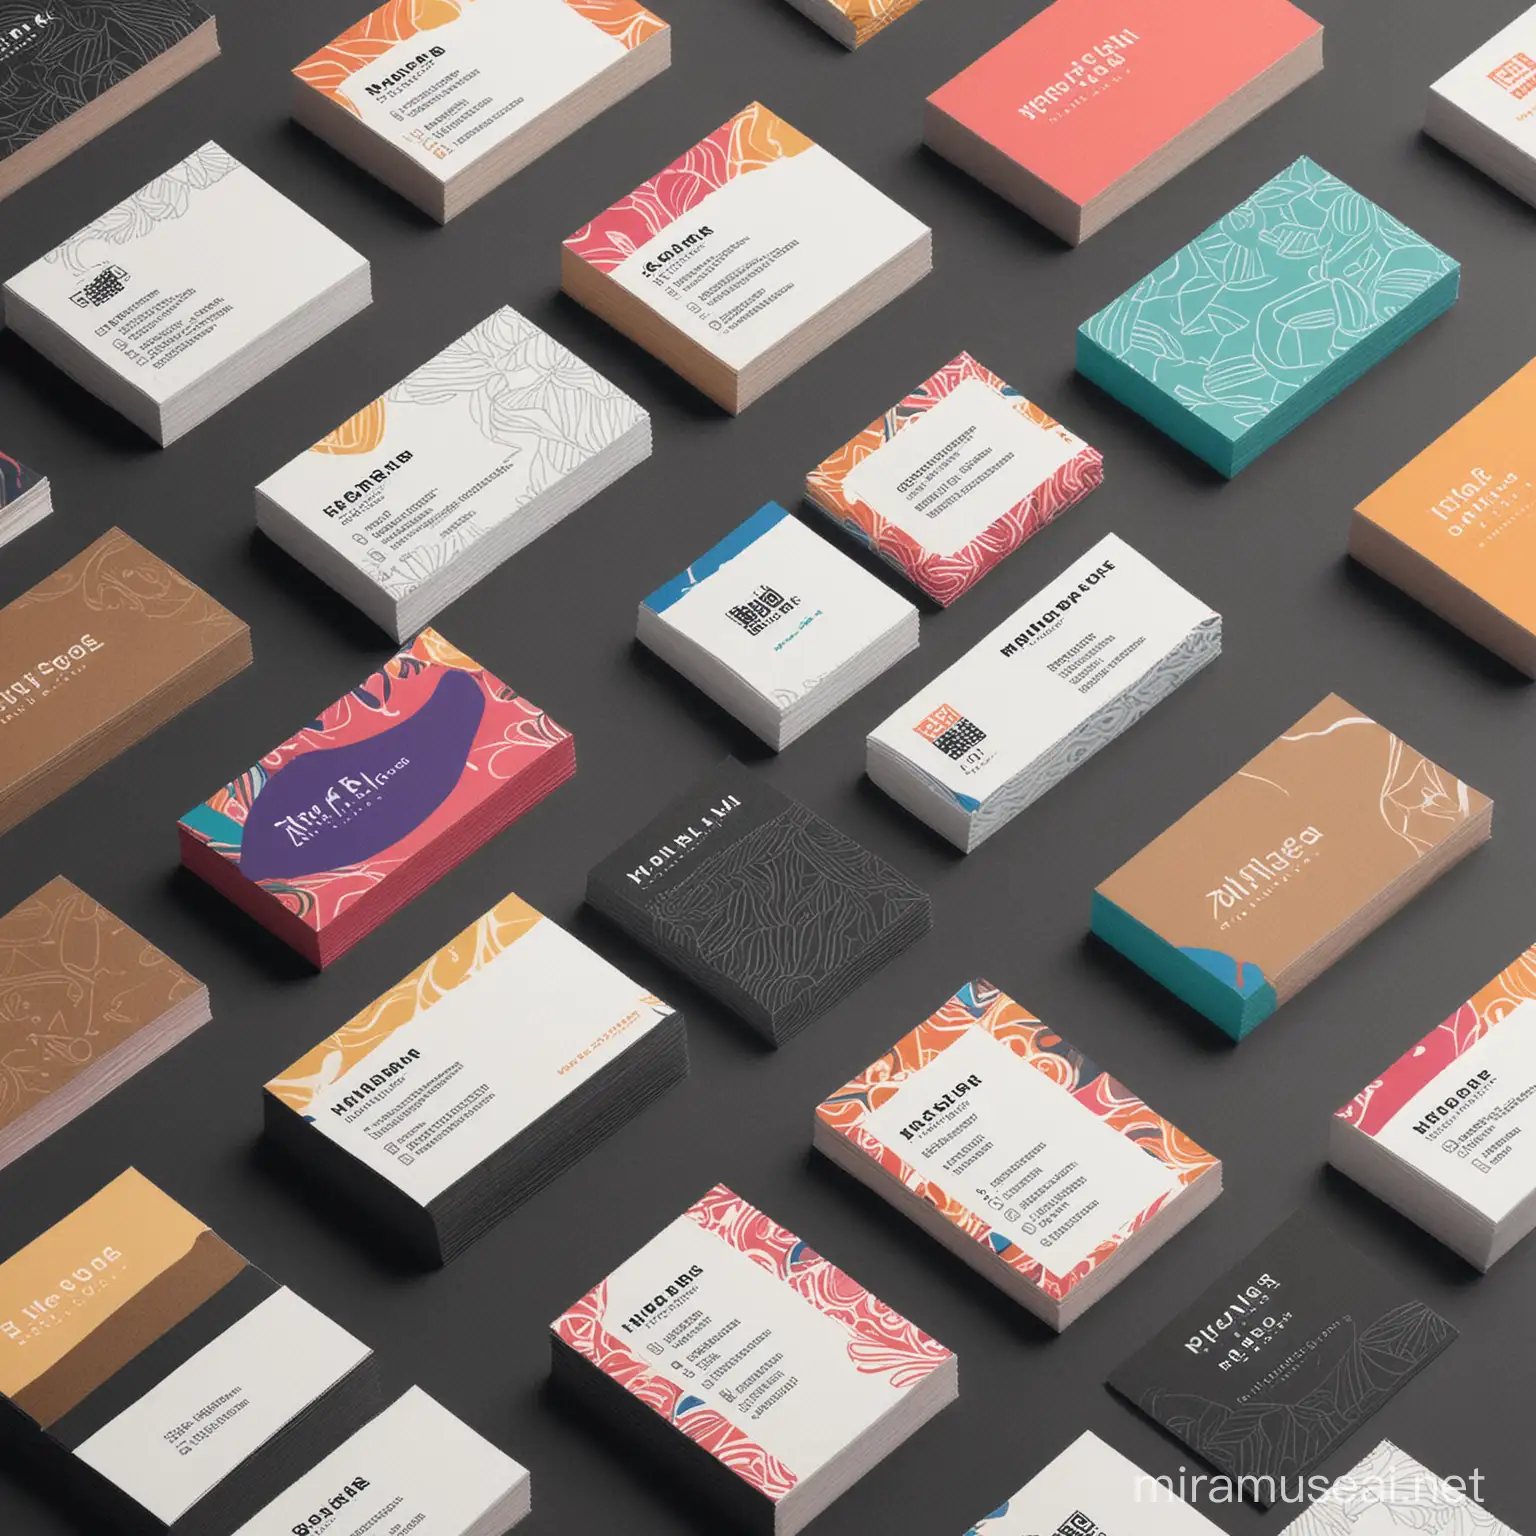 Custom Business Cards Display Professional and Creative Designs